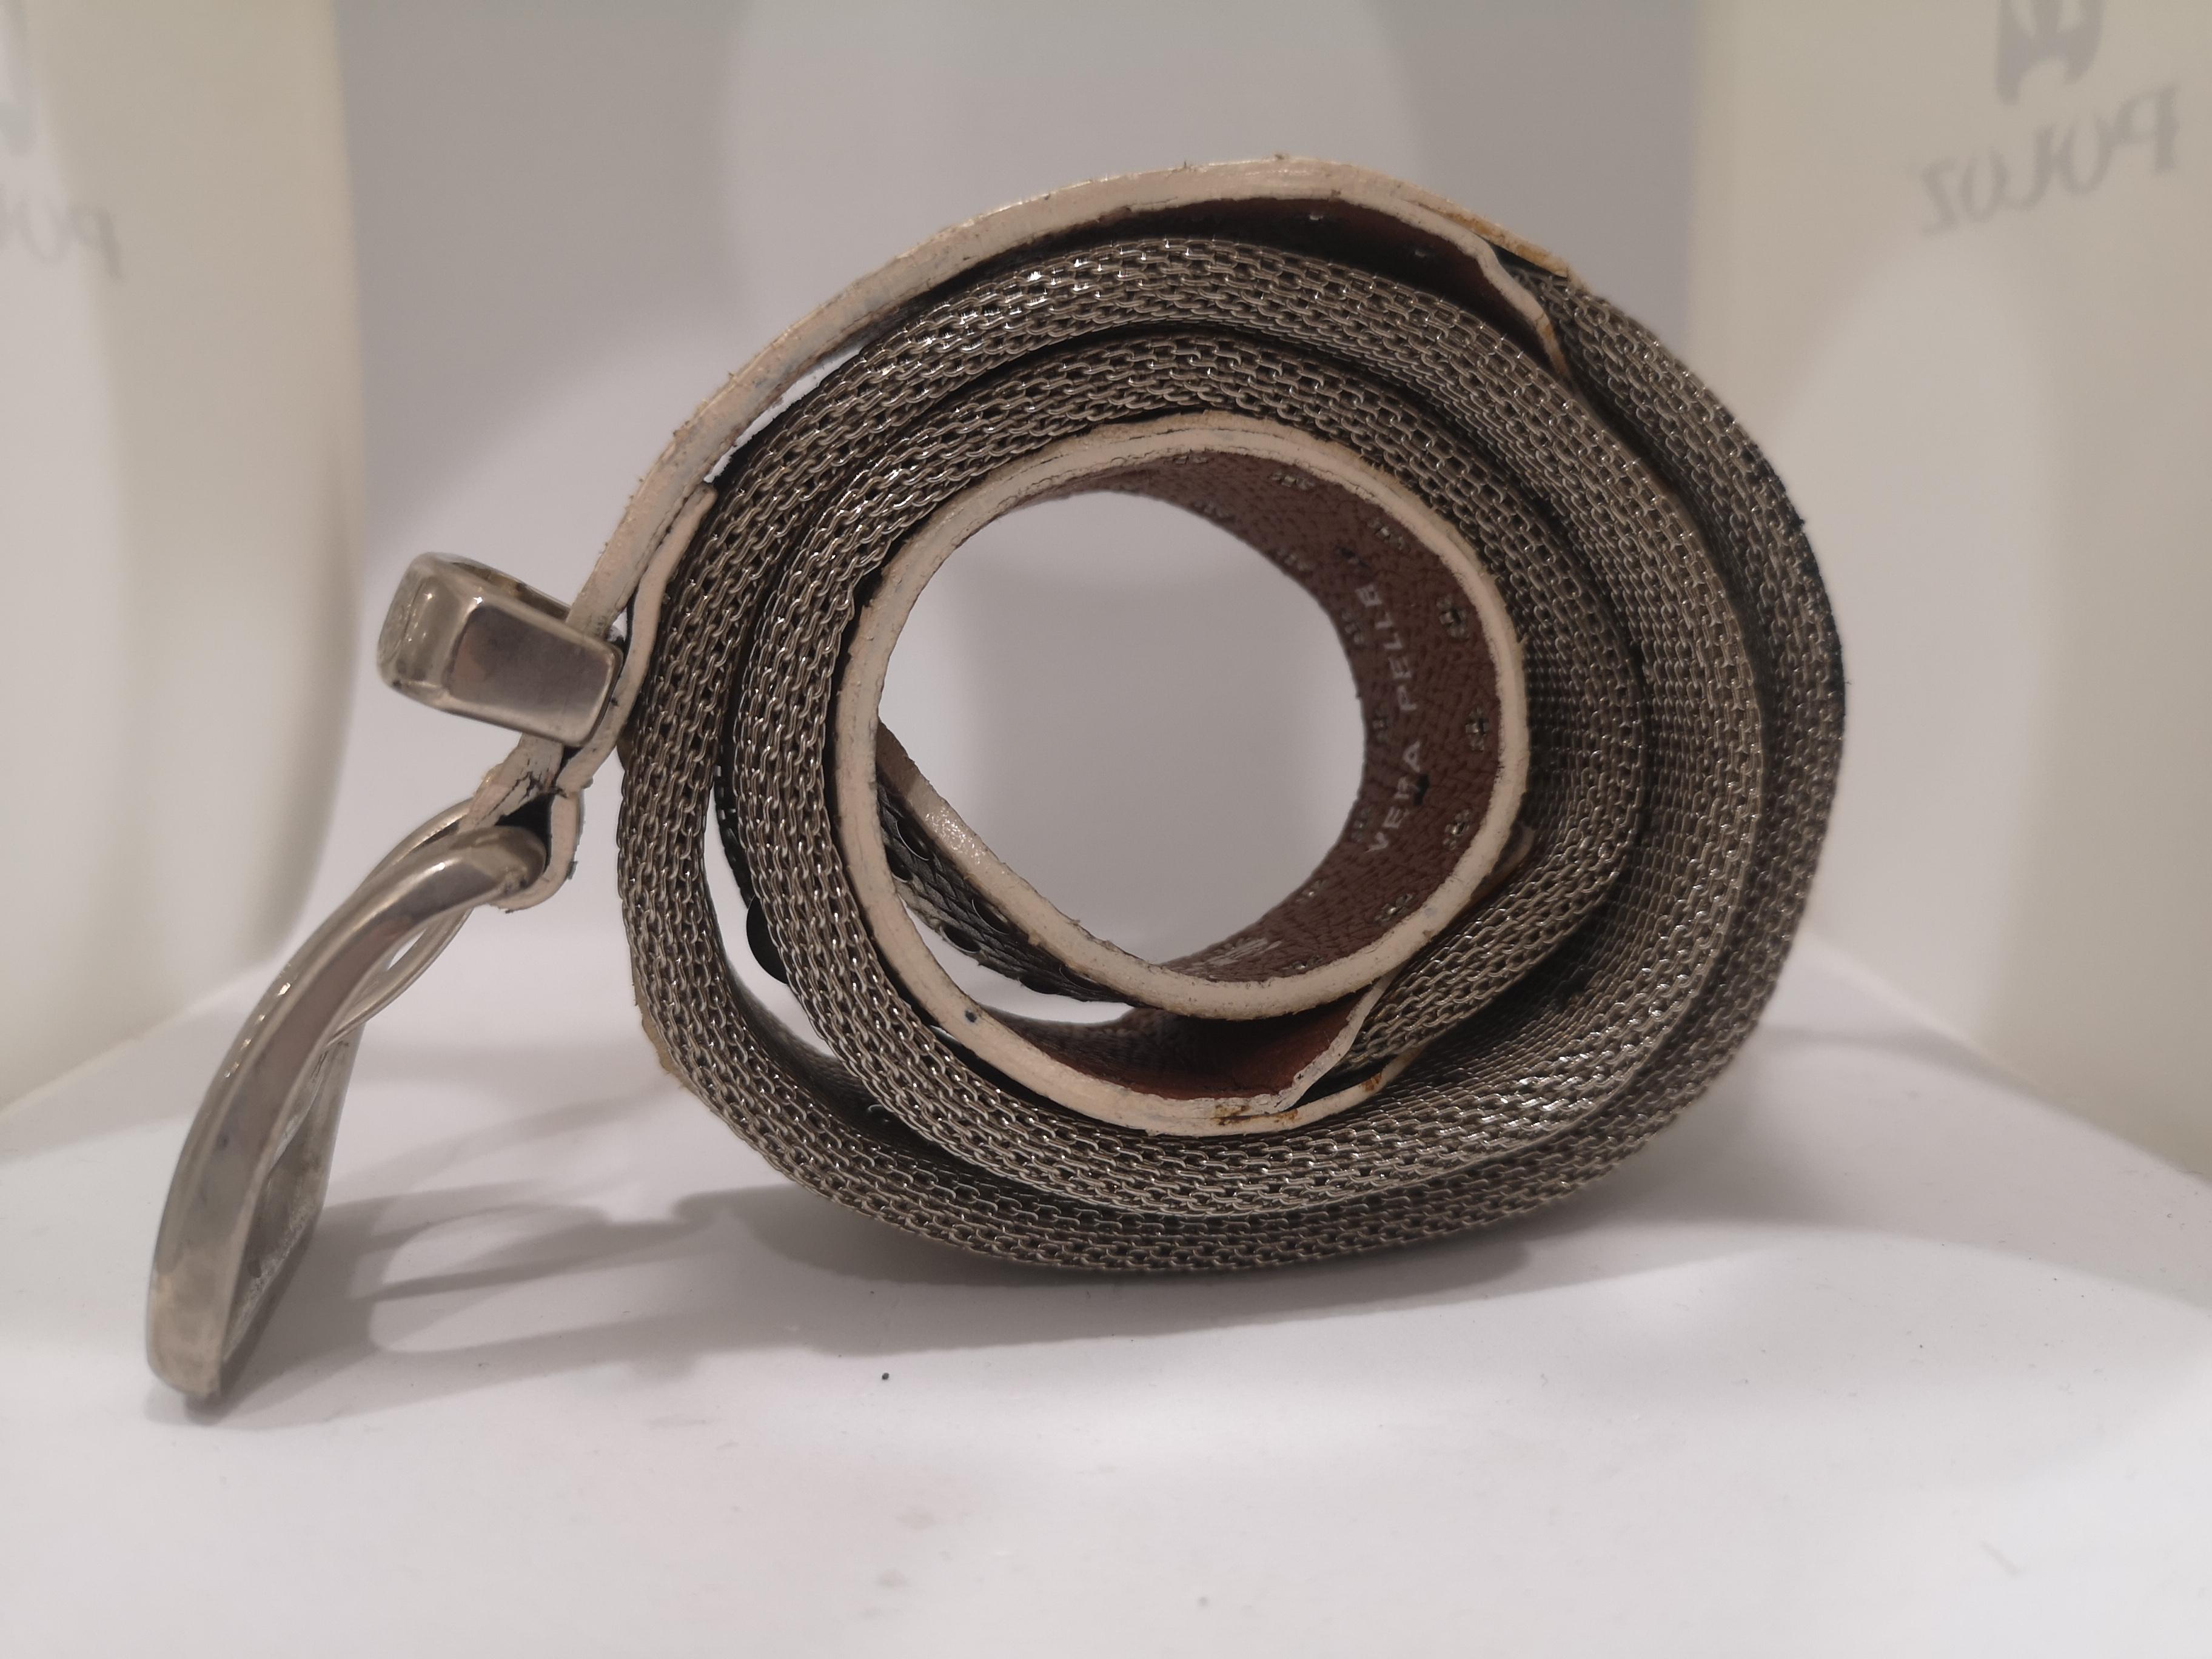 Vintage silver with gold tone leather swarovski stones belt In Excellent Condition For Sale In Capri, IT